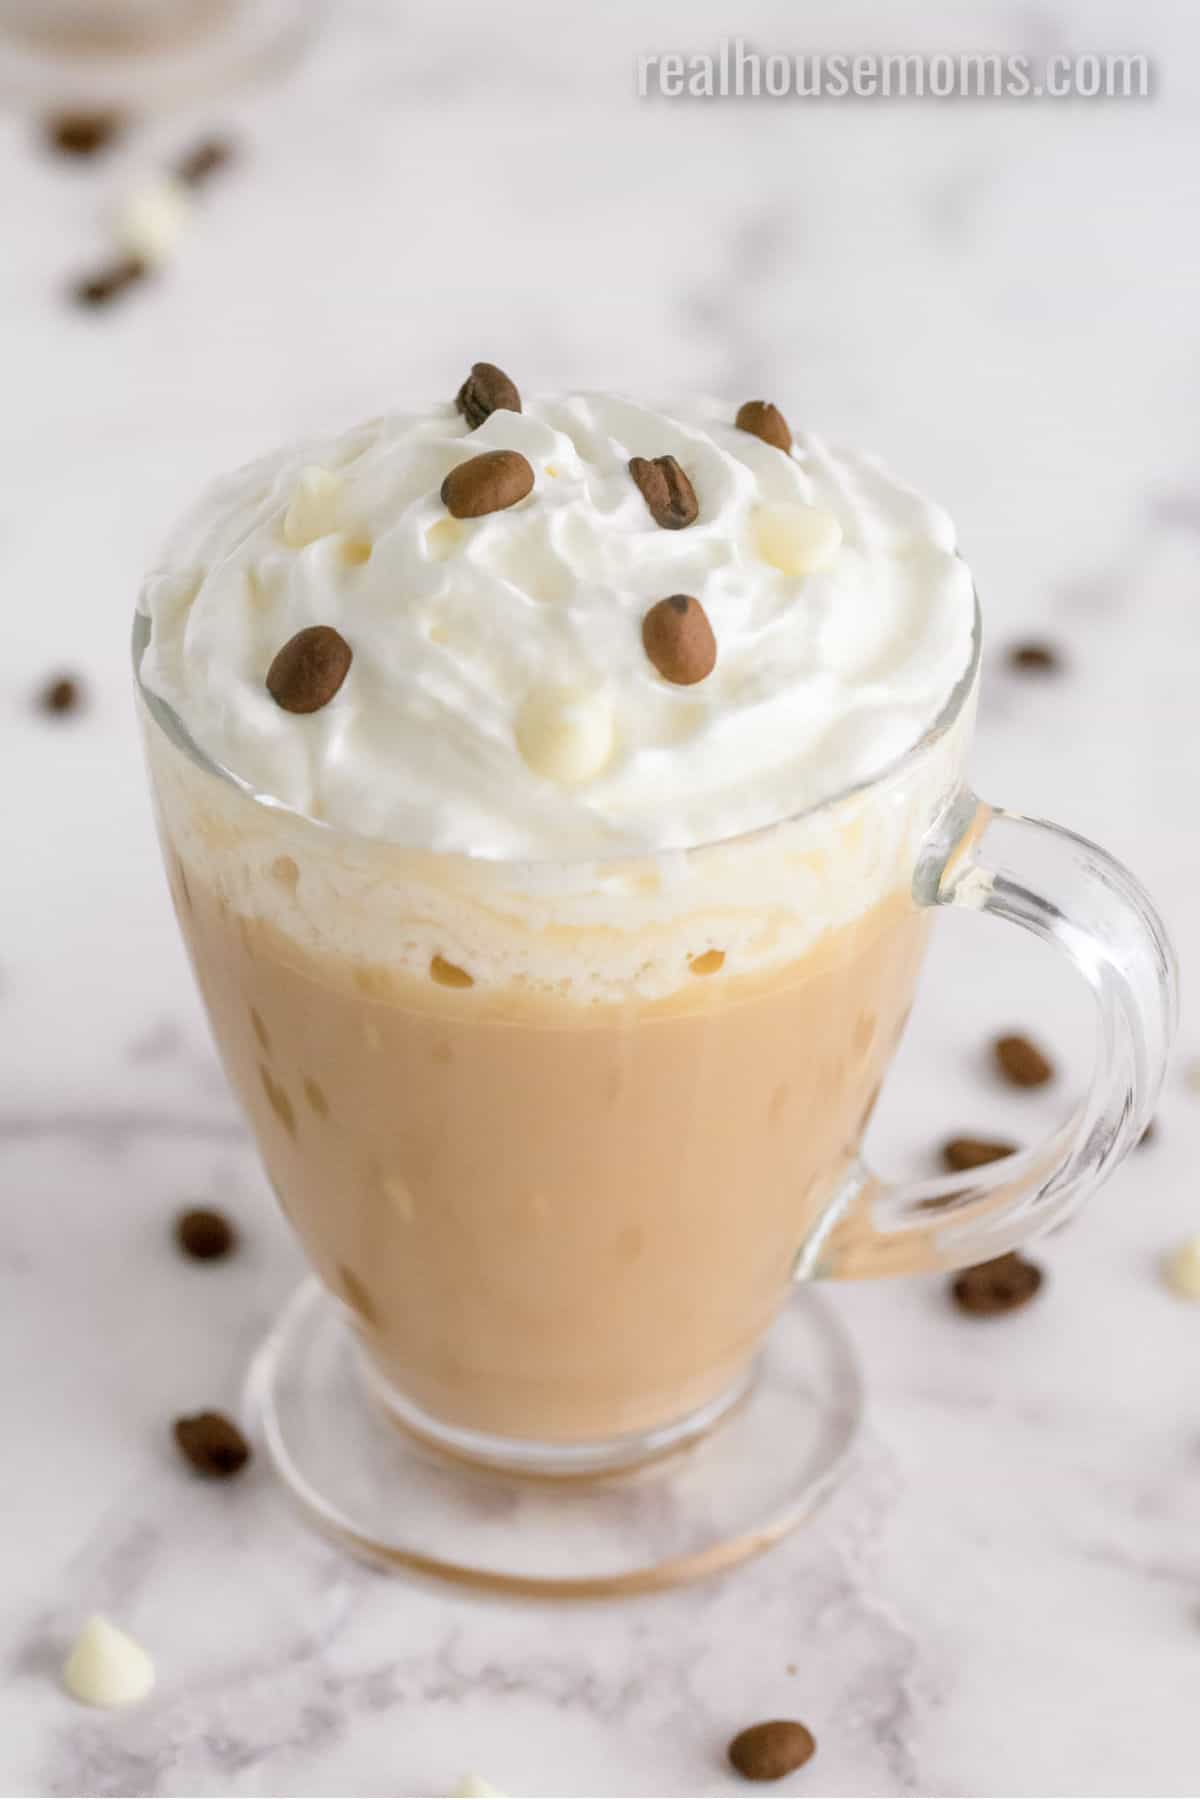 How to Make a Mocha Latte at Home (Recipe Included)